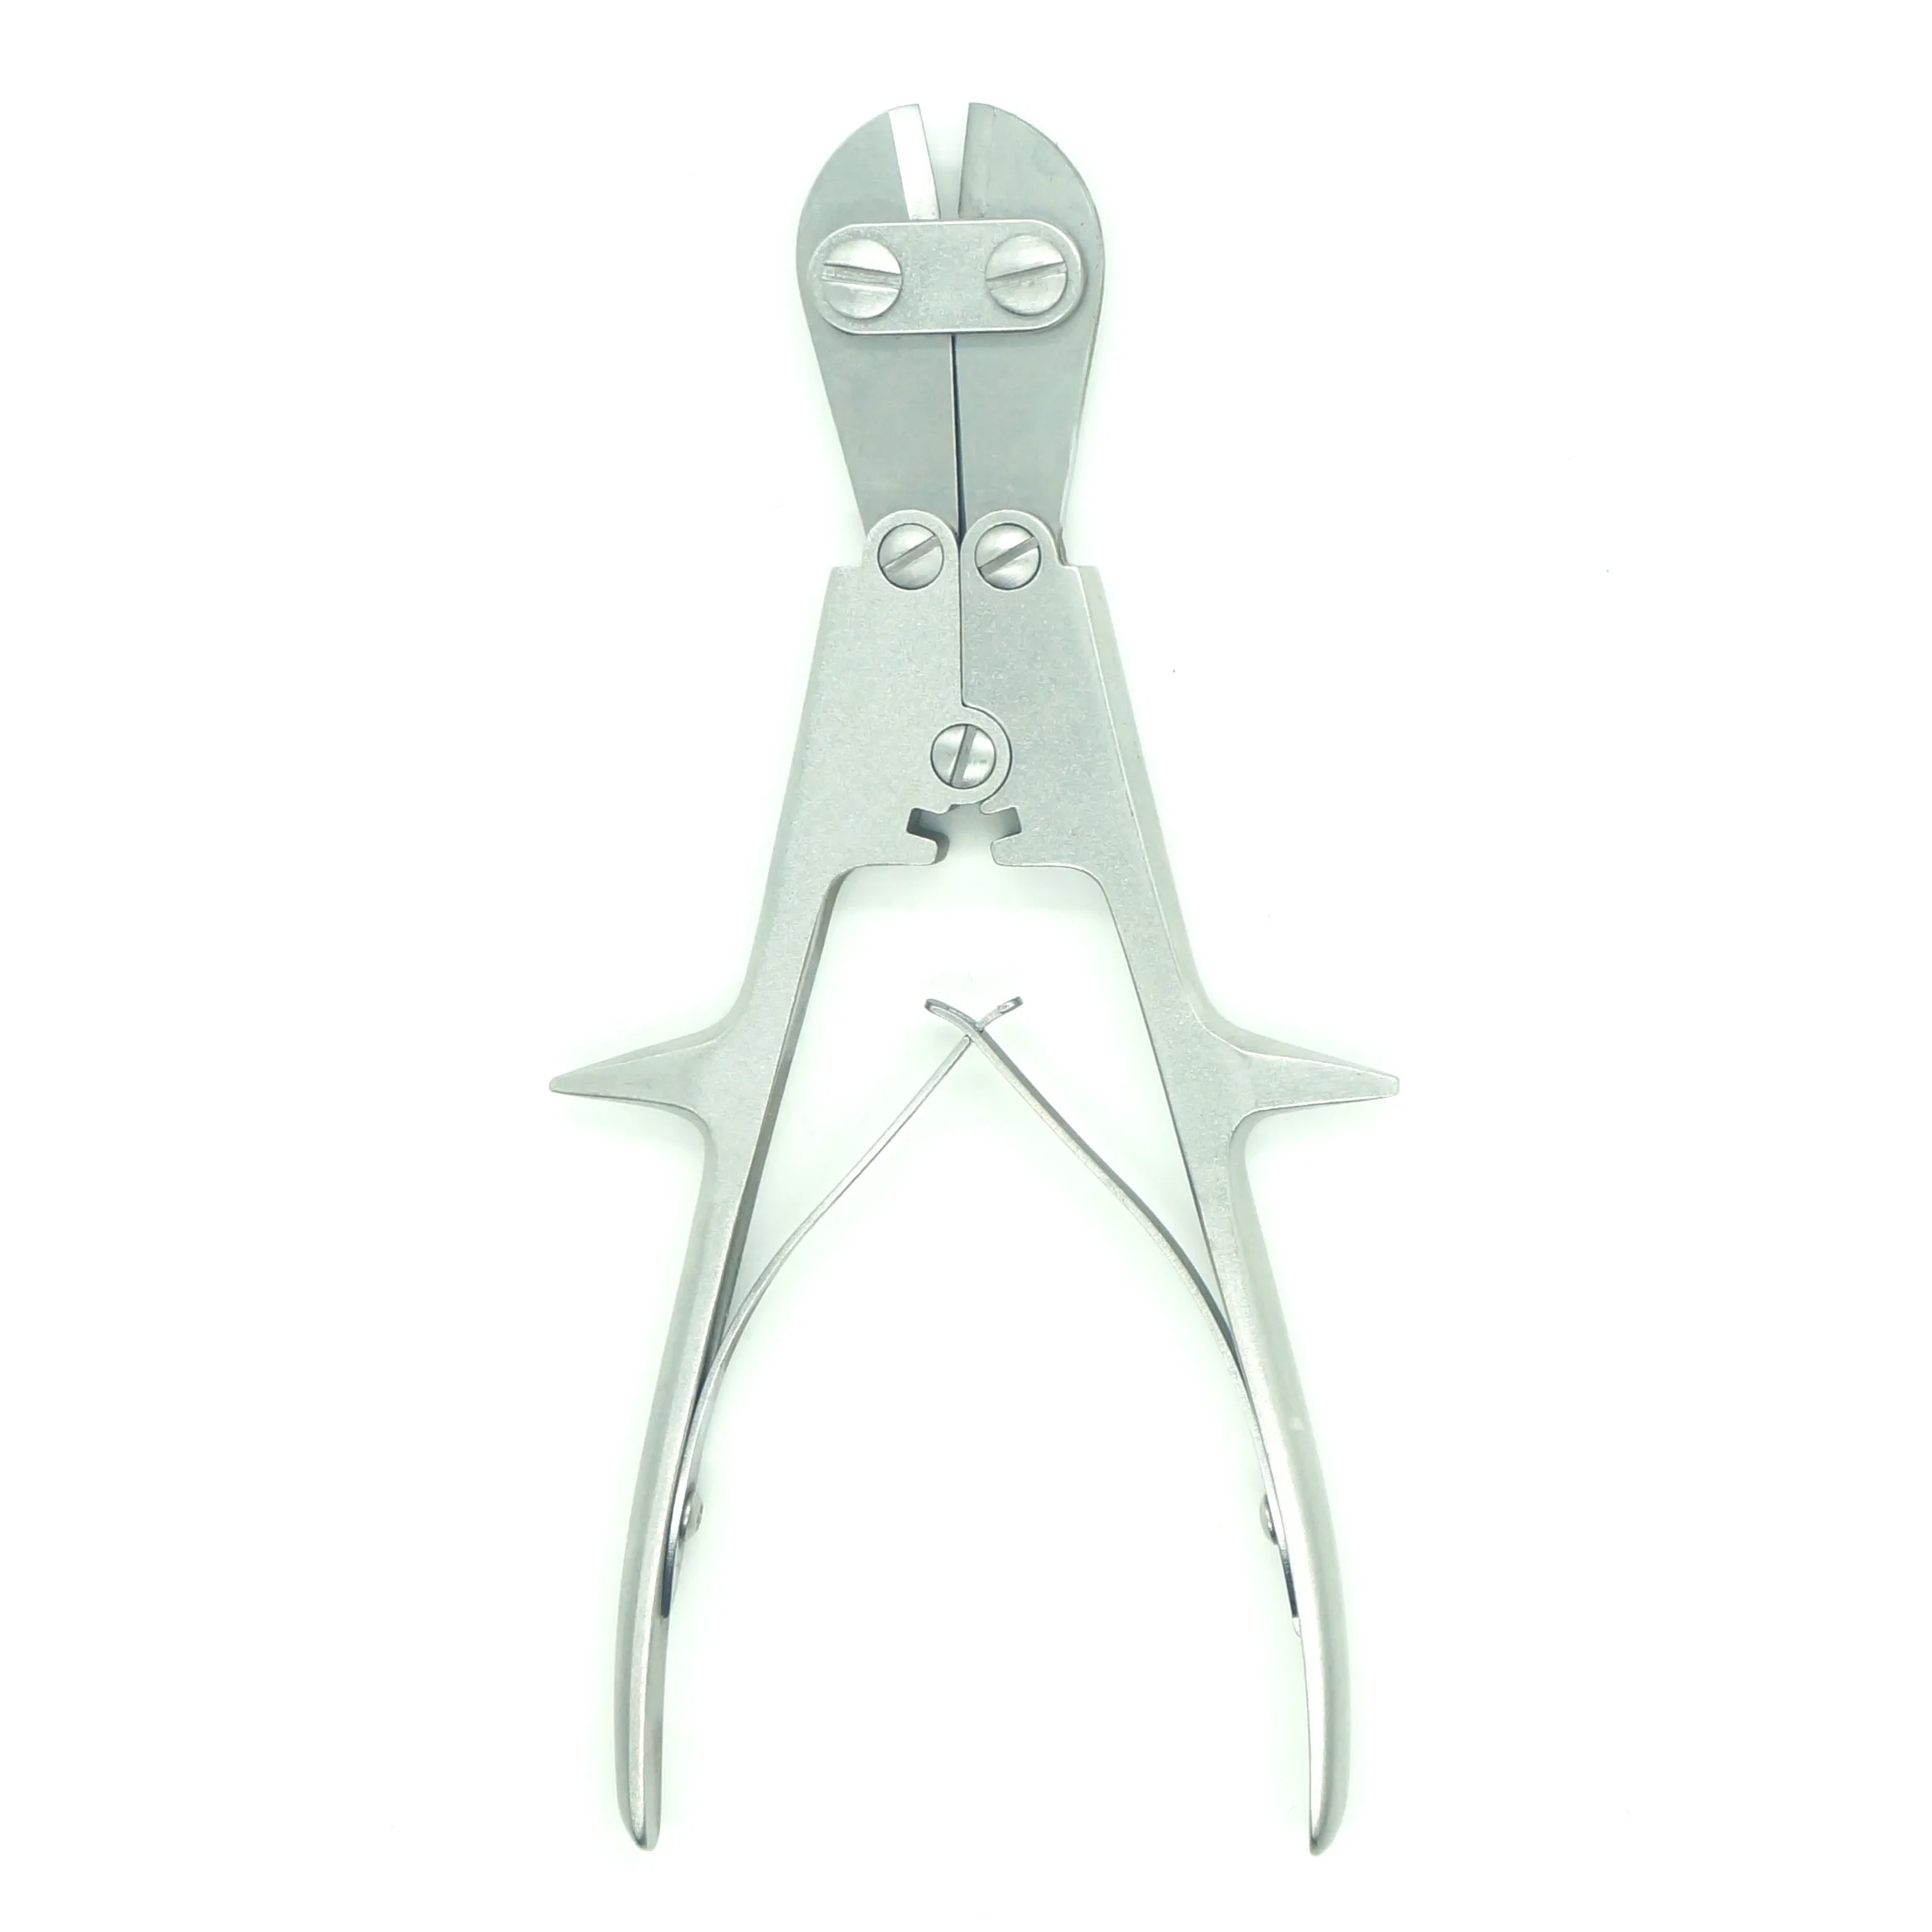 Veterinary Orthopedic Implant Cutting Wires Cutter Pliers Instruments enlarge